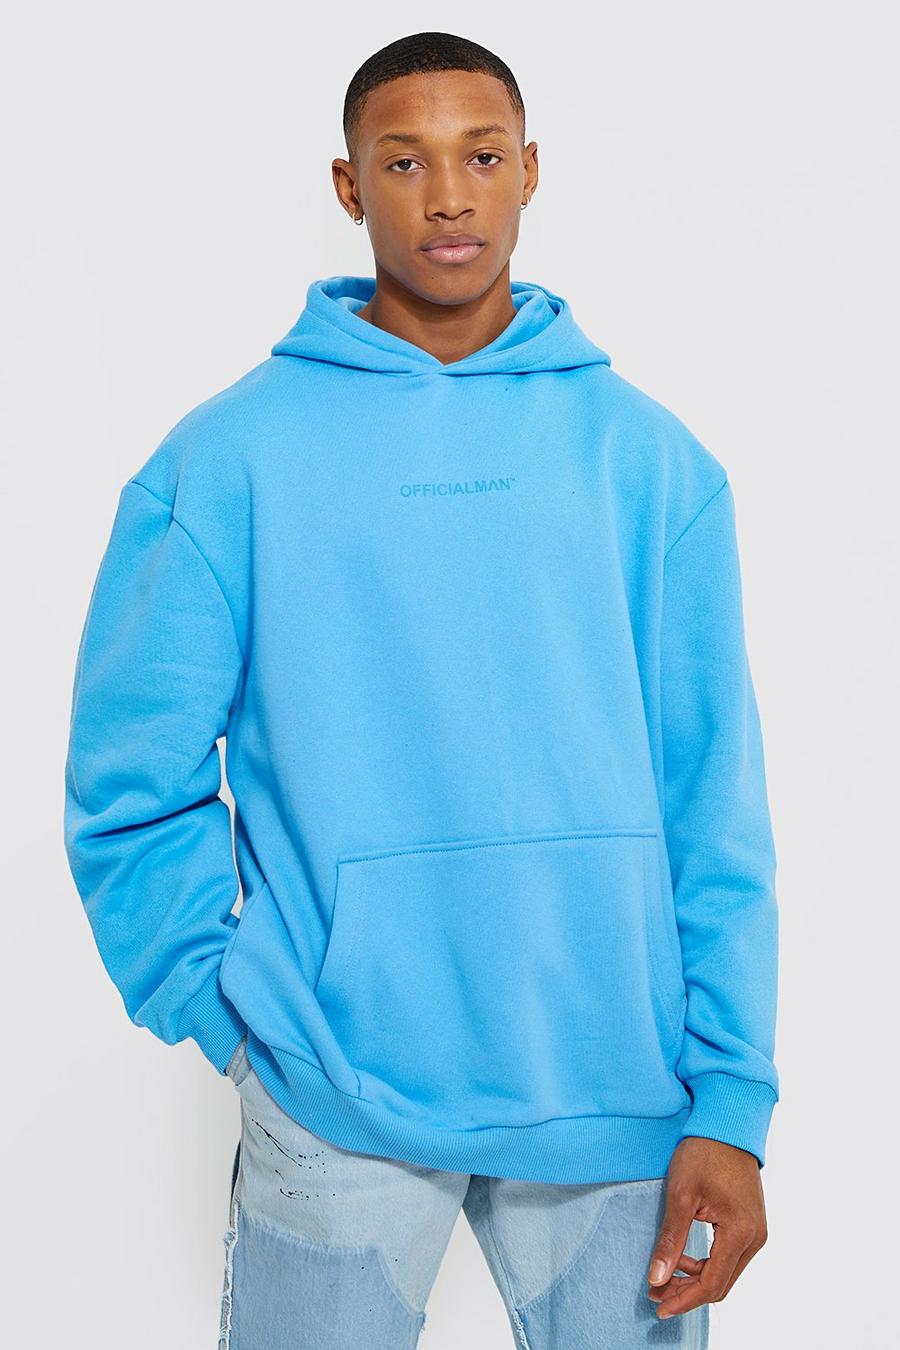 Blue Official Man Oversized Hoodie